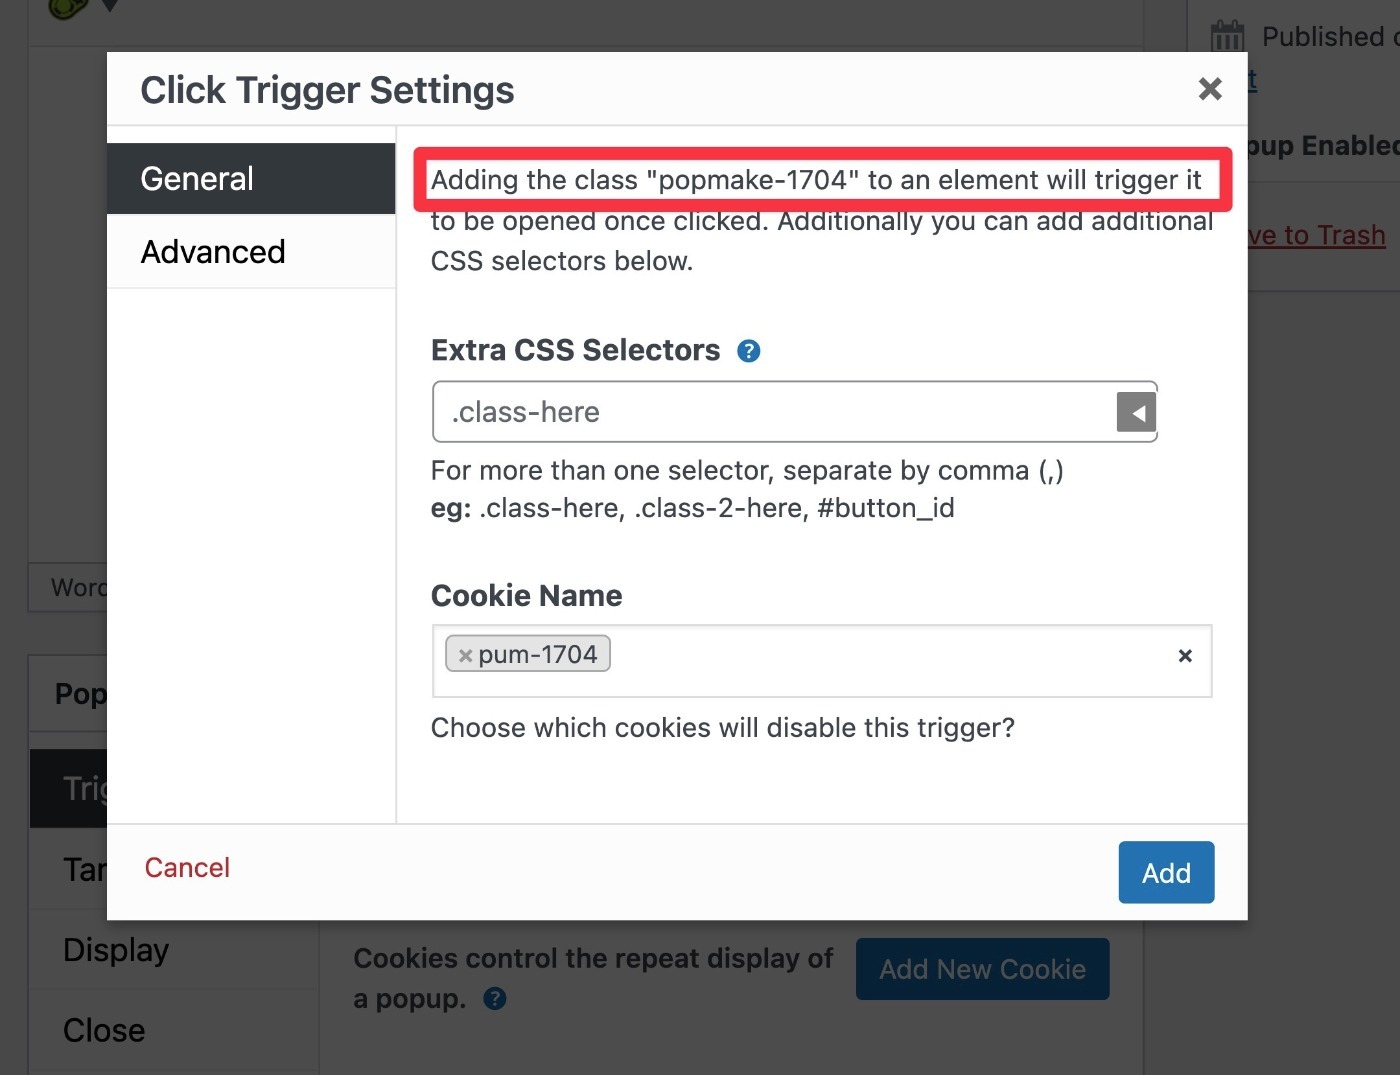 An example of a click trigger